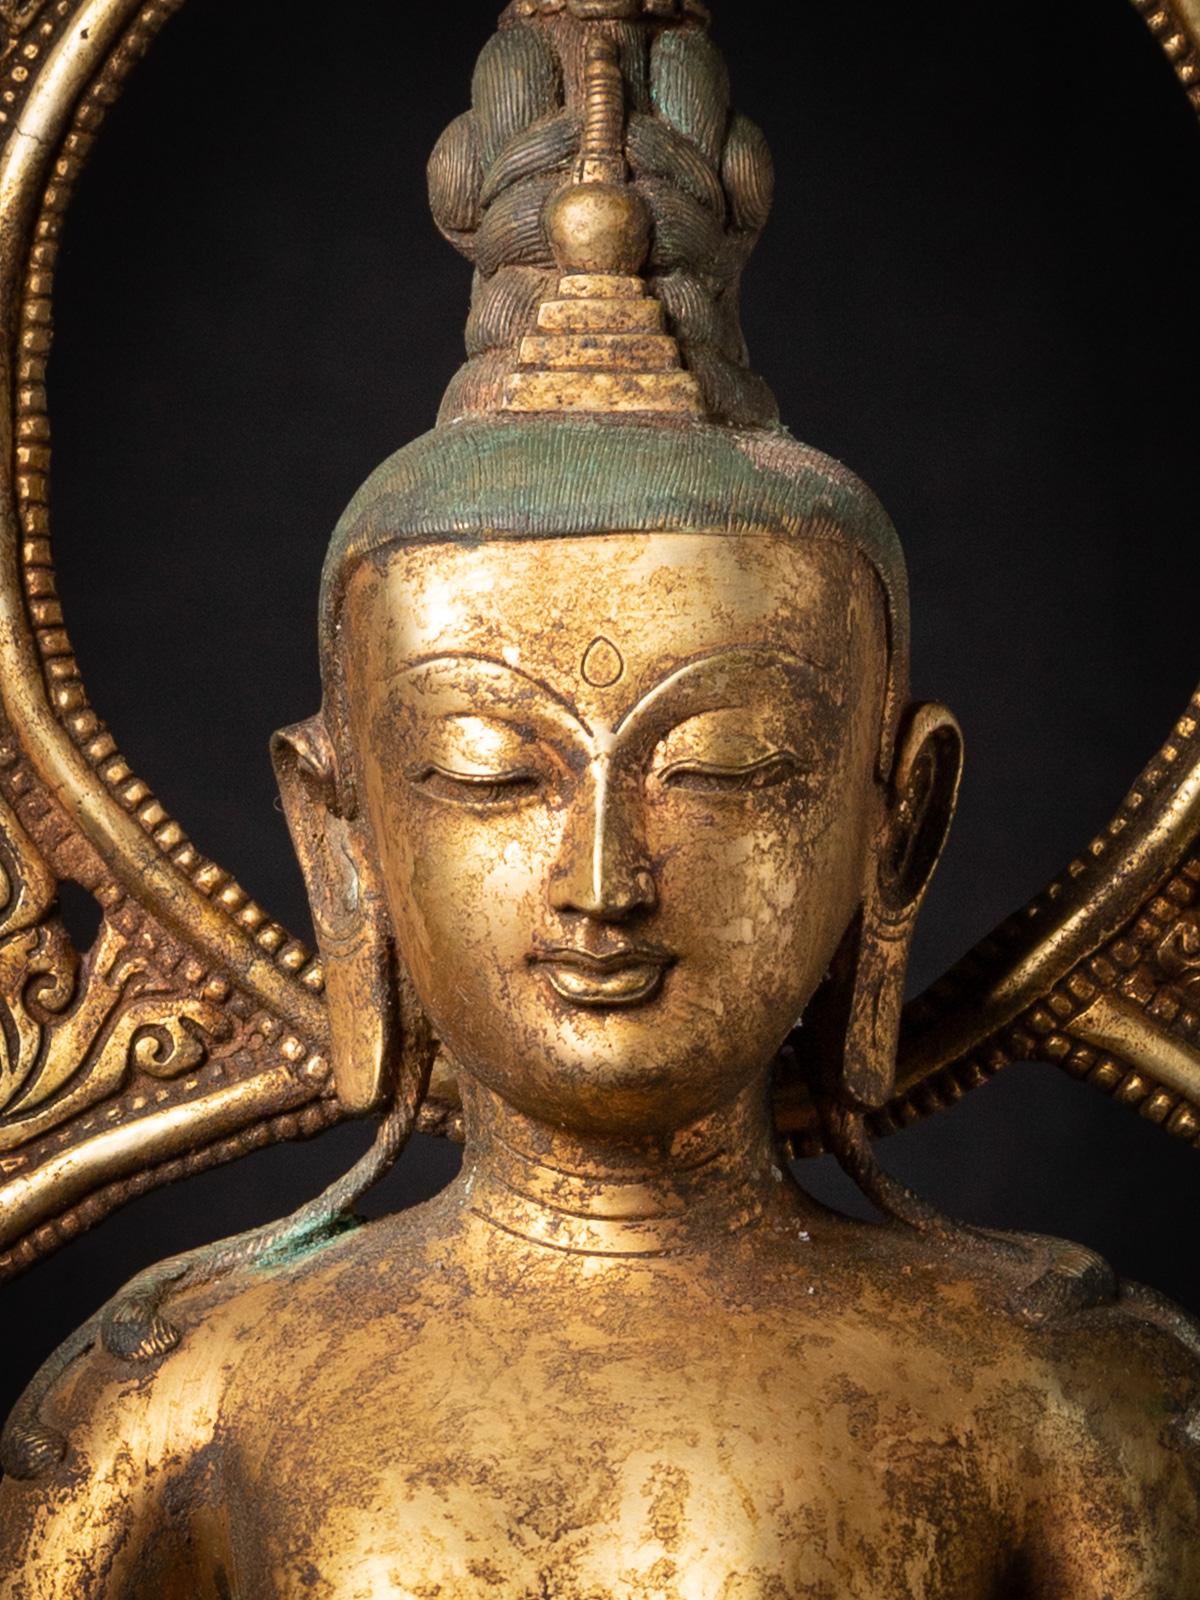 The Old bronze Nepali Bodhisattva Padmapani Lokeshvara is a truly exceptional and sacred artifact originating from Nepal. Crafted from bronze, this Bodhisattva statue stands at an impressive height of 86 cm and measures 31.5 cm in width and 27.5 cm